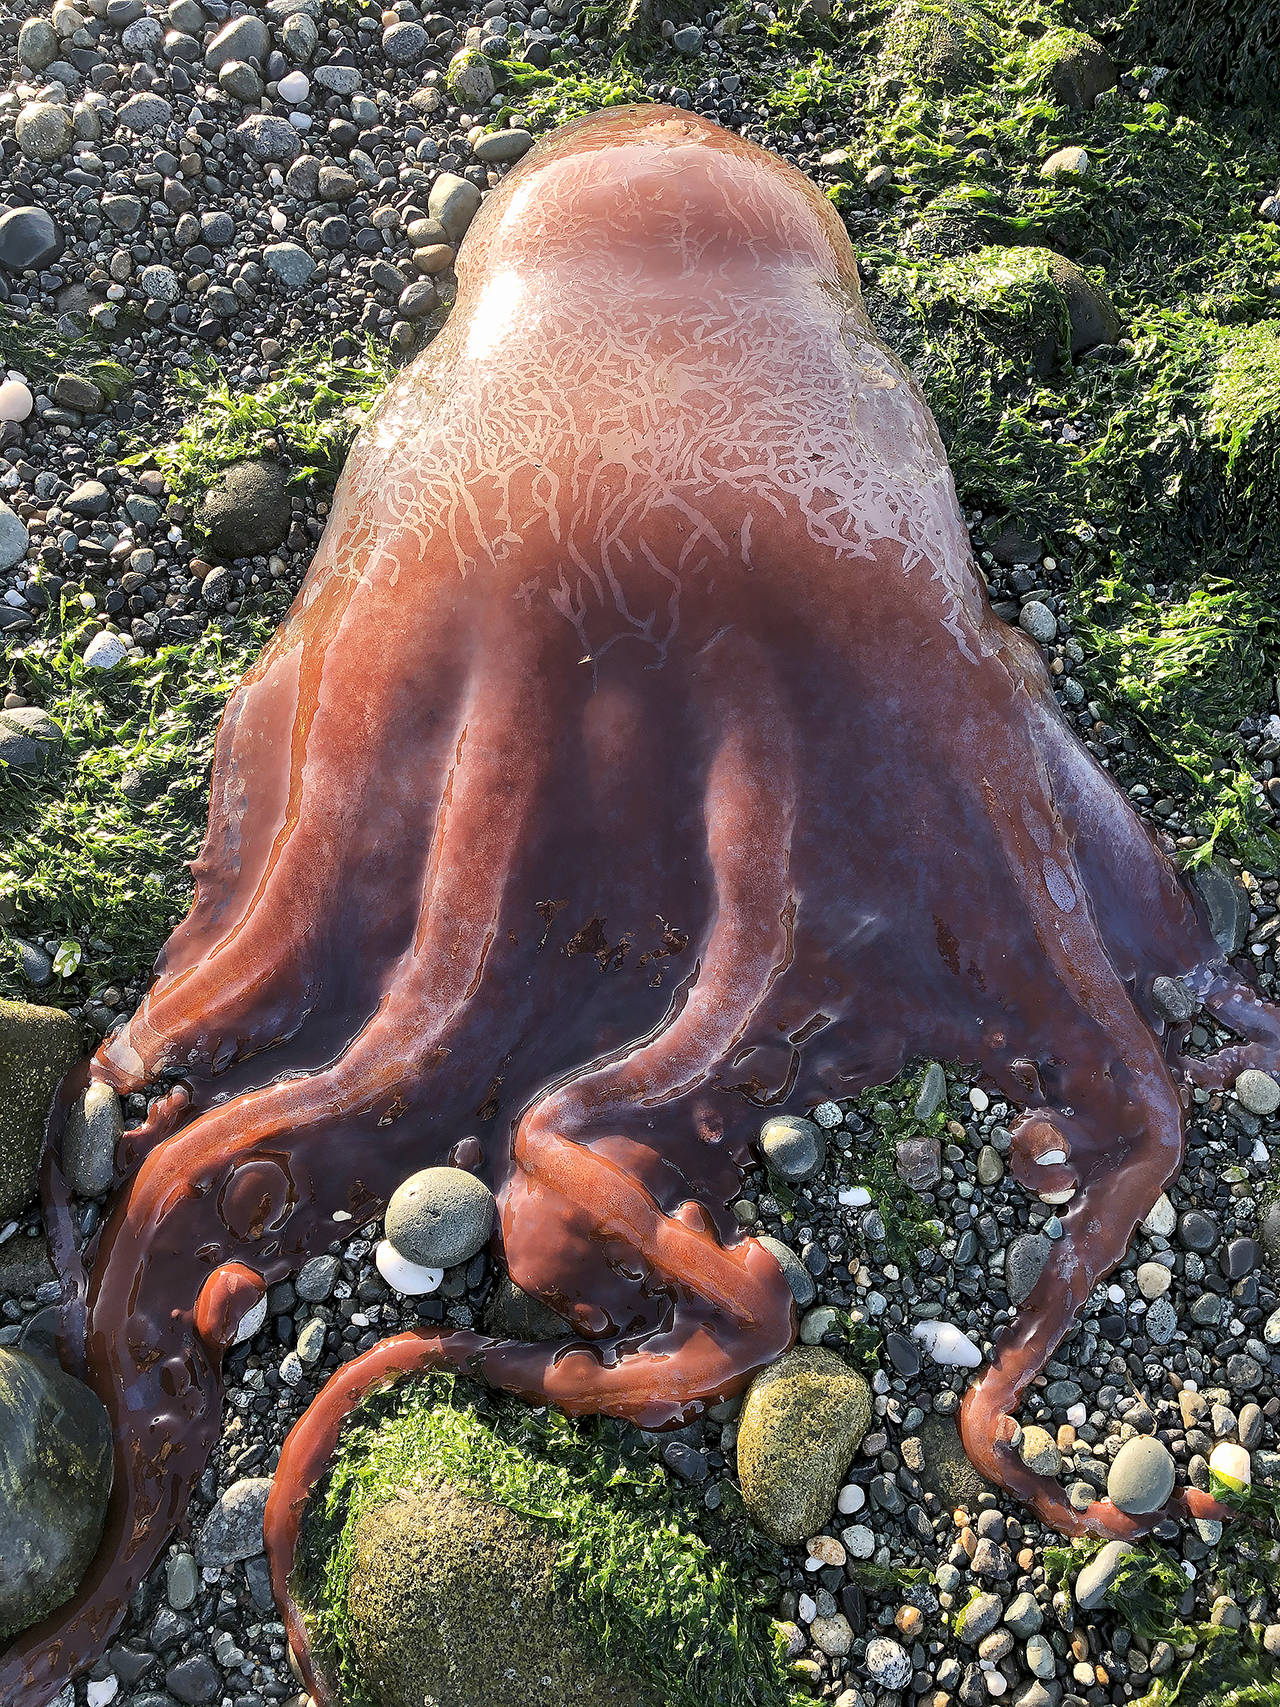 A sea creature found on the beach at Ebey’s Landing may be a Haliphron atlanticus, or seven-armed octopus, scientists have theorized. (Ron Newberry)